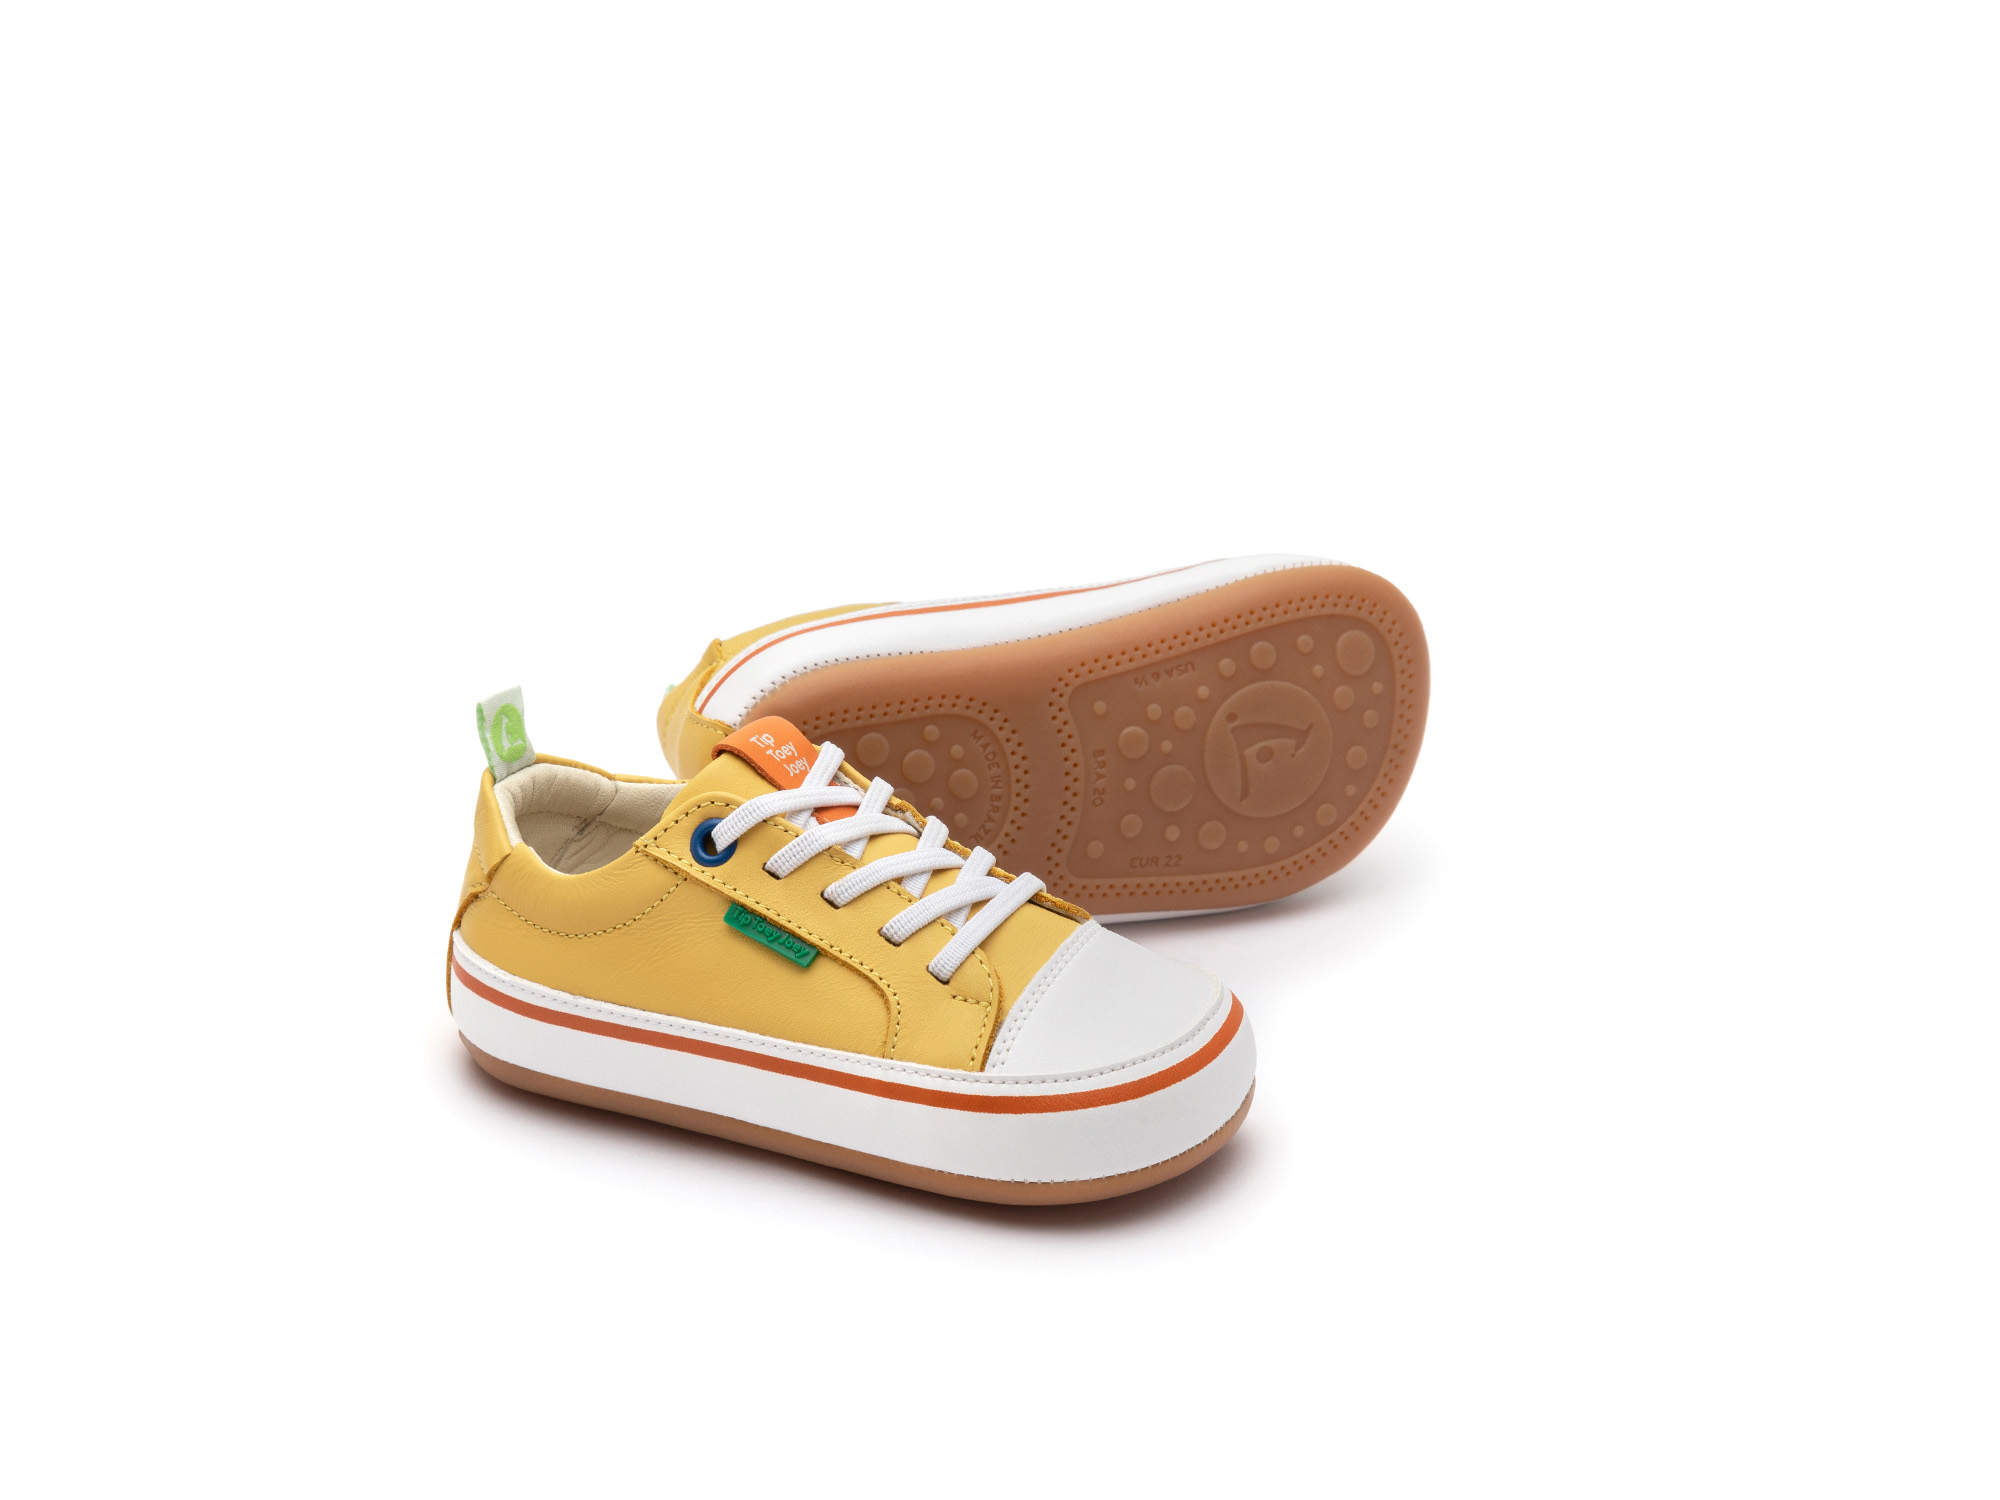 UP & GO Sneakers for Unissex Funky Colors | Tip Toey Joey - Australia - 0